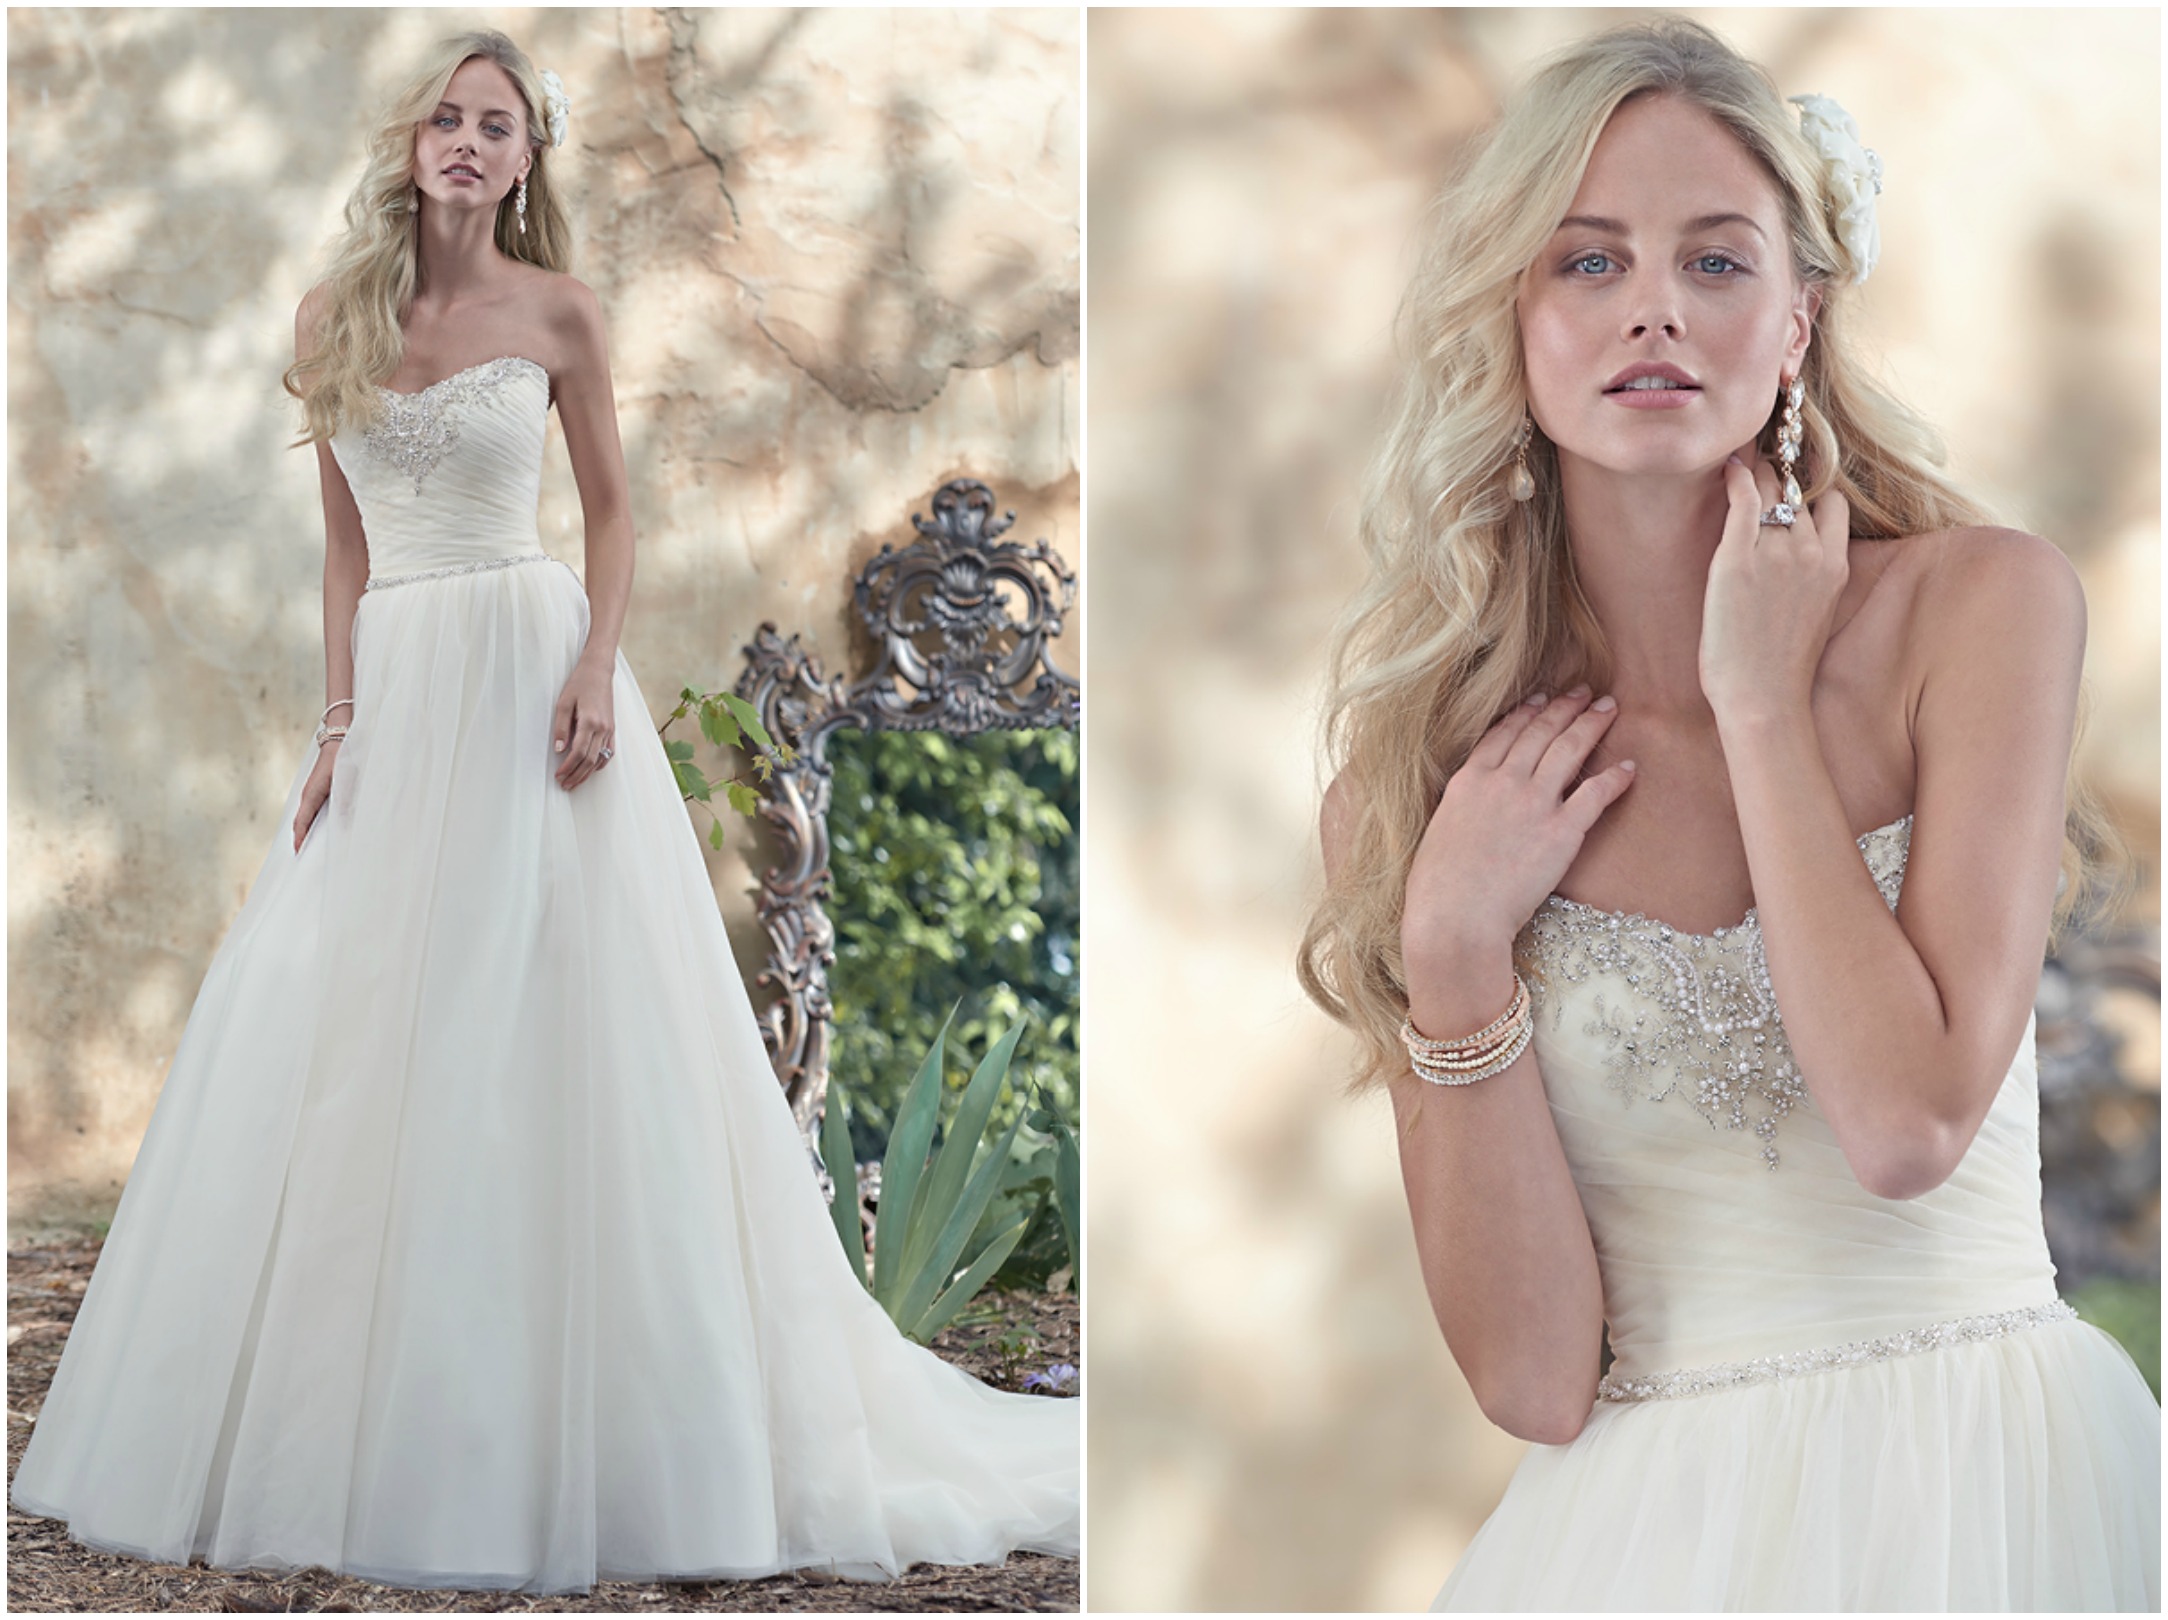 <a href="http://www.maggiesottero.com/maggie-sottero/misty/9518" target="_blank">Maggie Sottero Spring 2016</a>